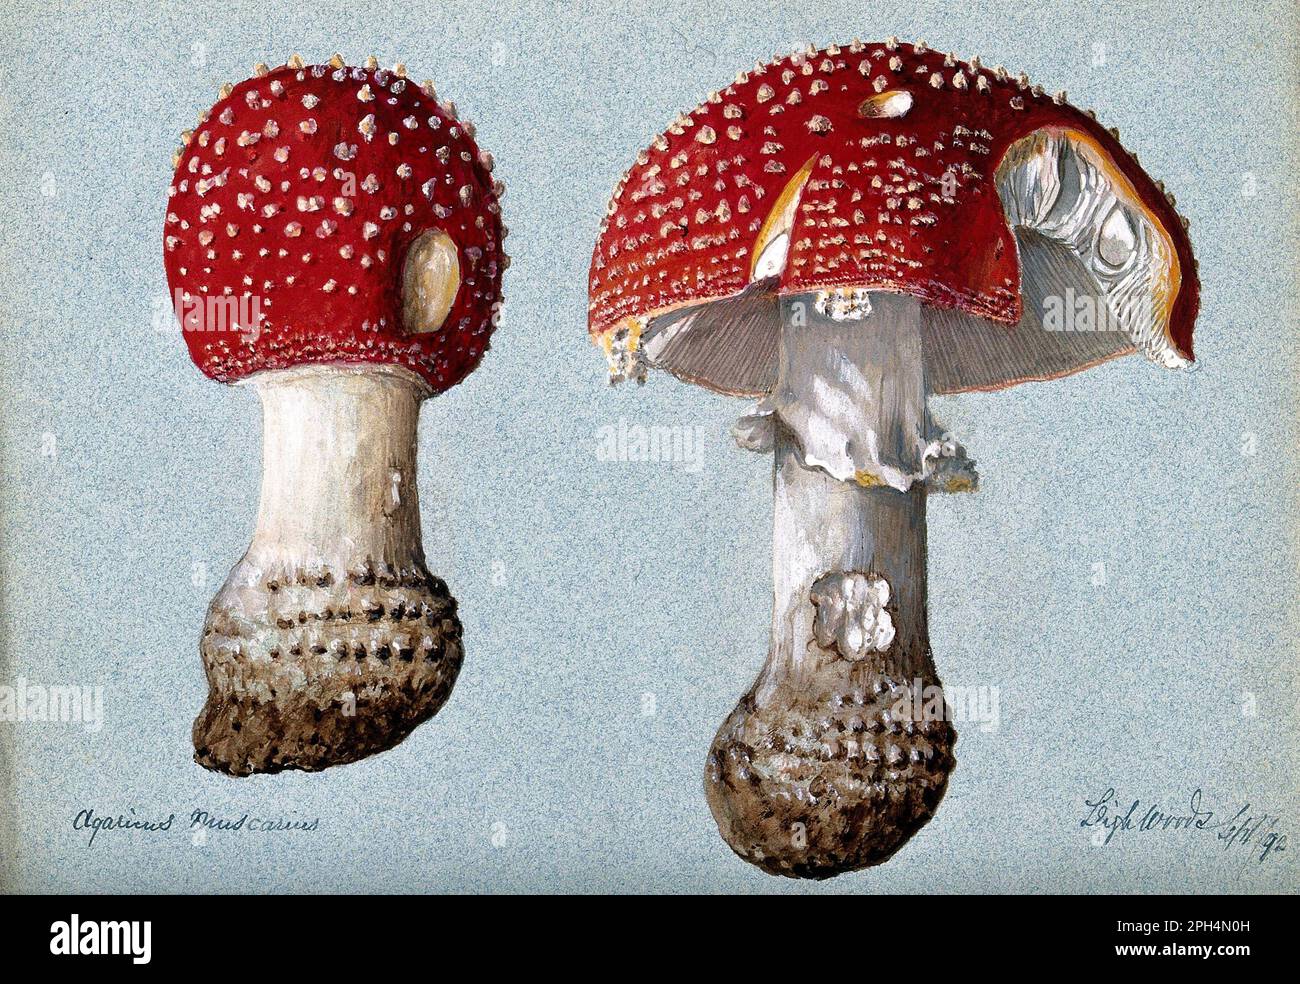 Amanita muscaria, commonly known as the Fly agaric or Fly amanita, vintage watercolour from 1892 Stock Photo